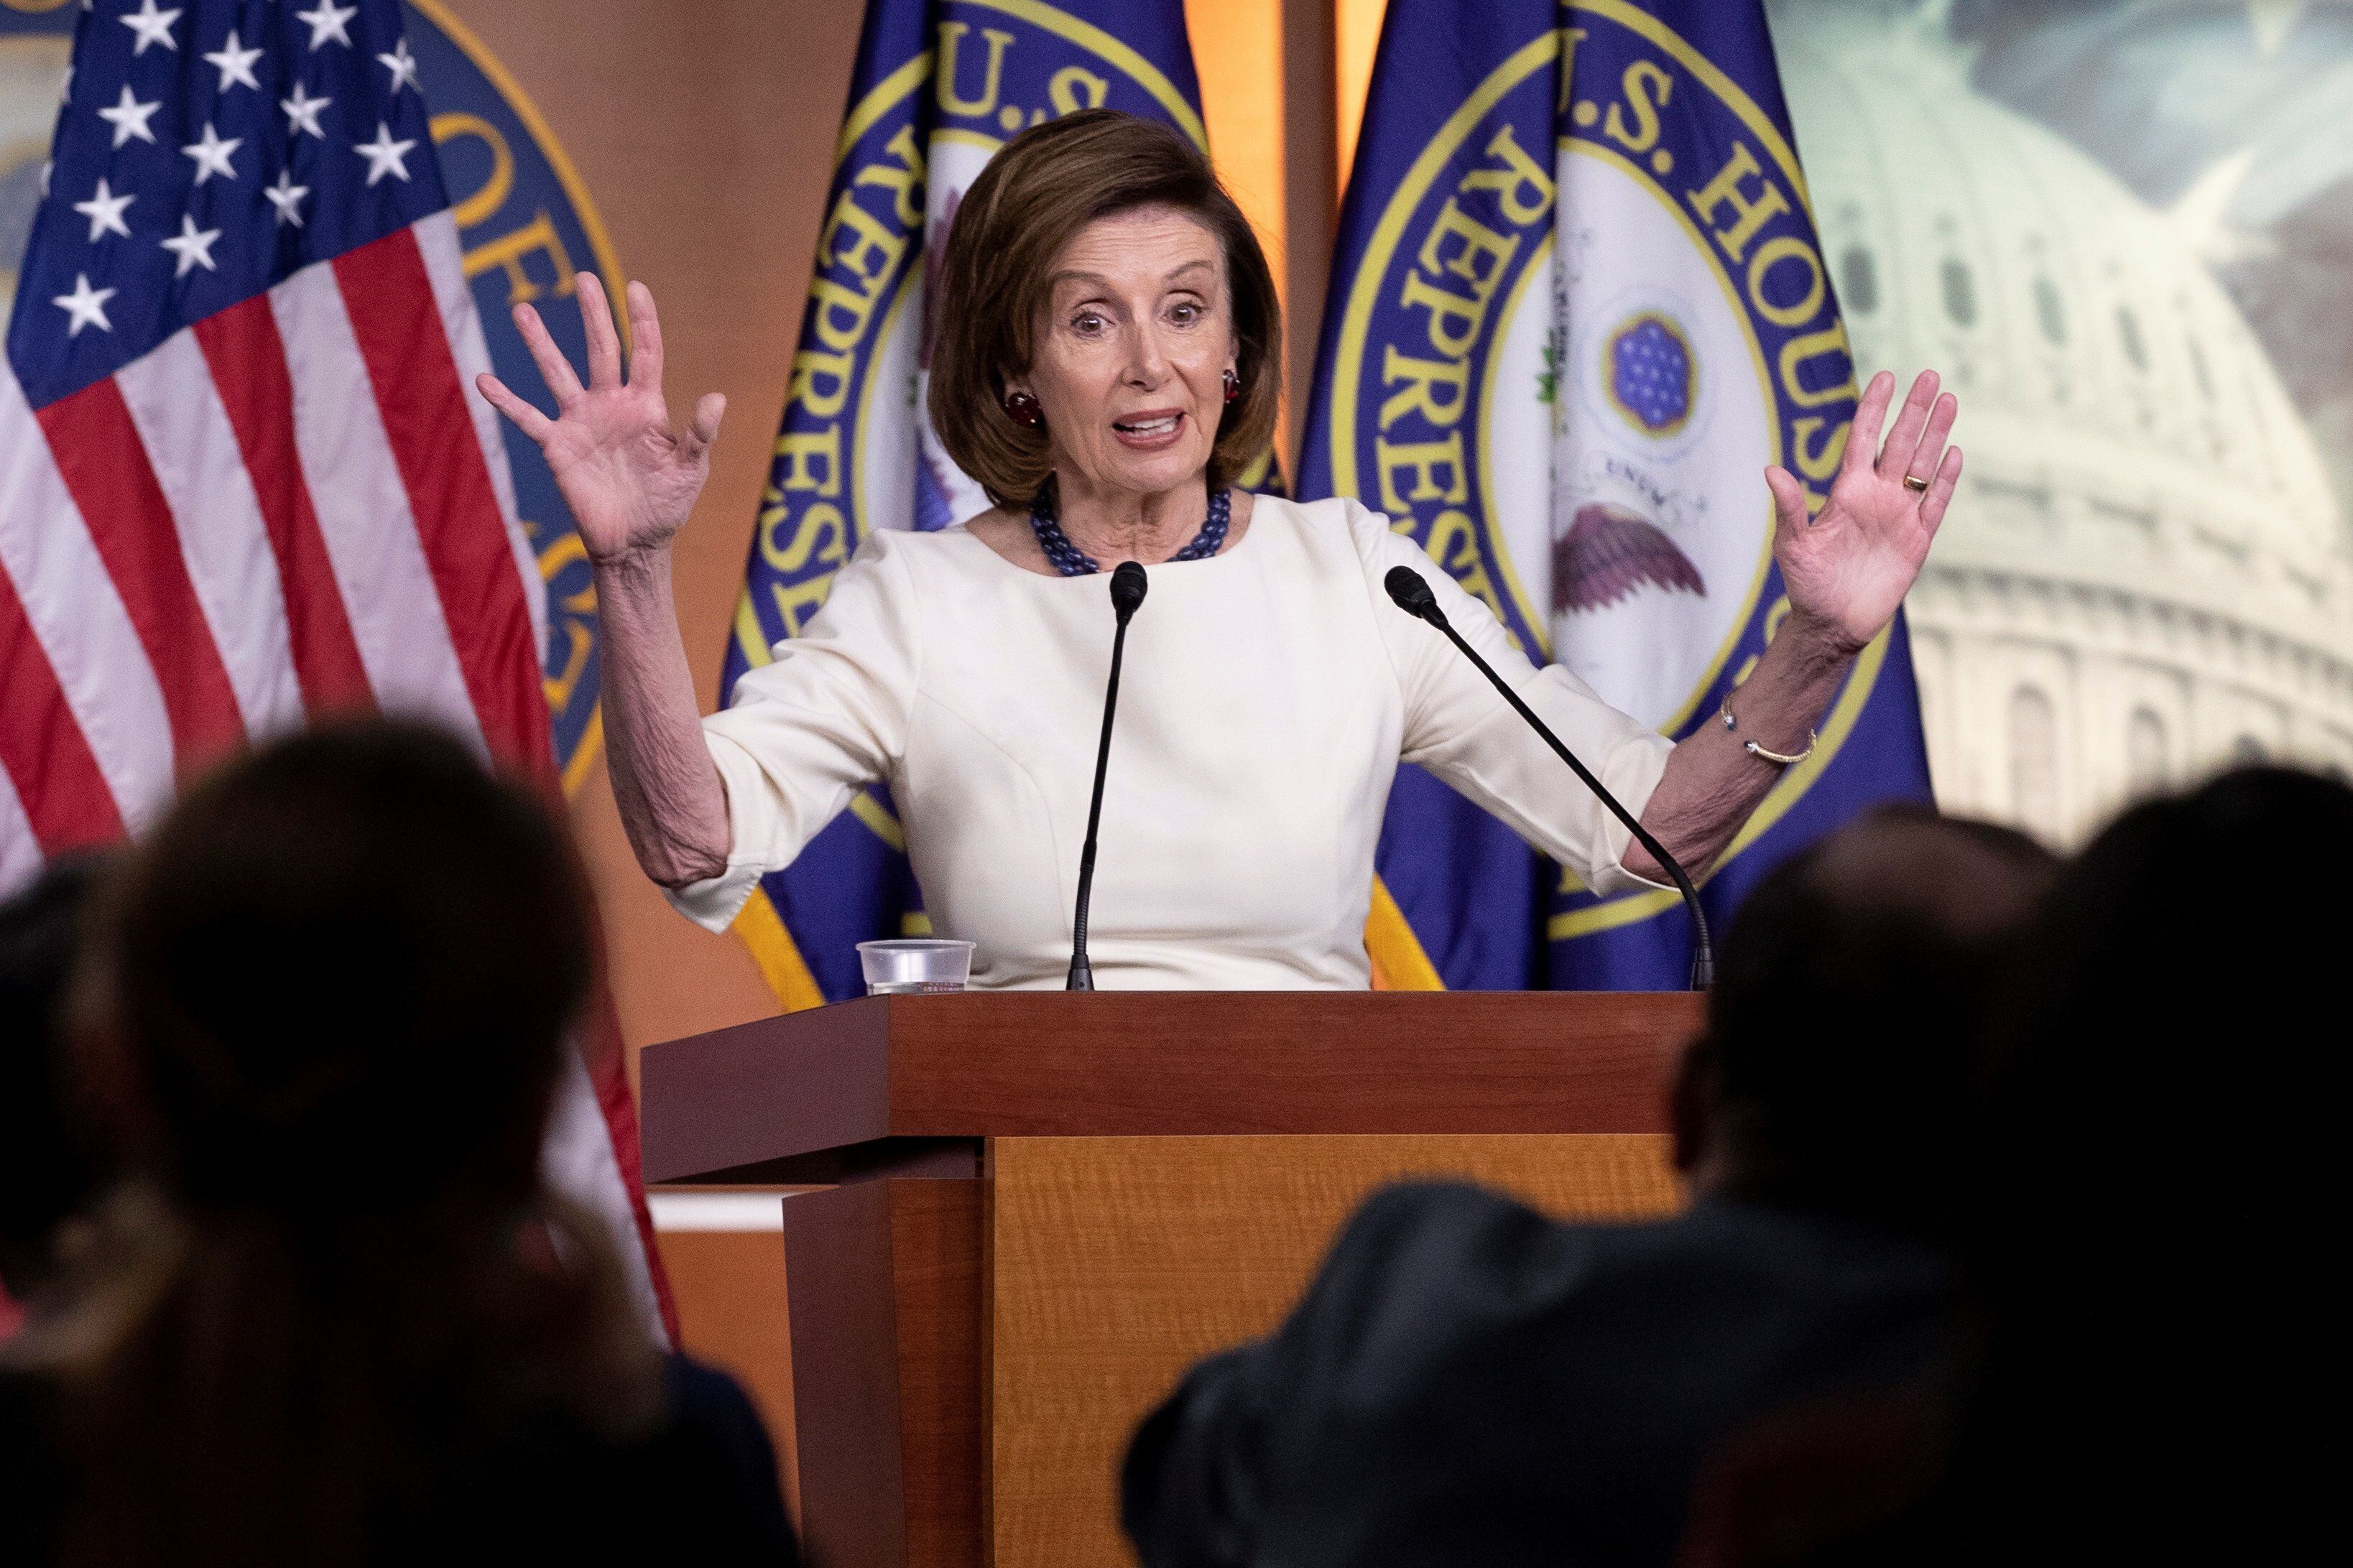 The president of the US House of Representatives, Nancy Pelosi, speaks at a press conference on November 3, 2021 (EFE / Michael Reynolds)
